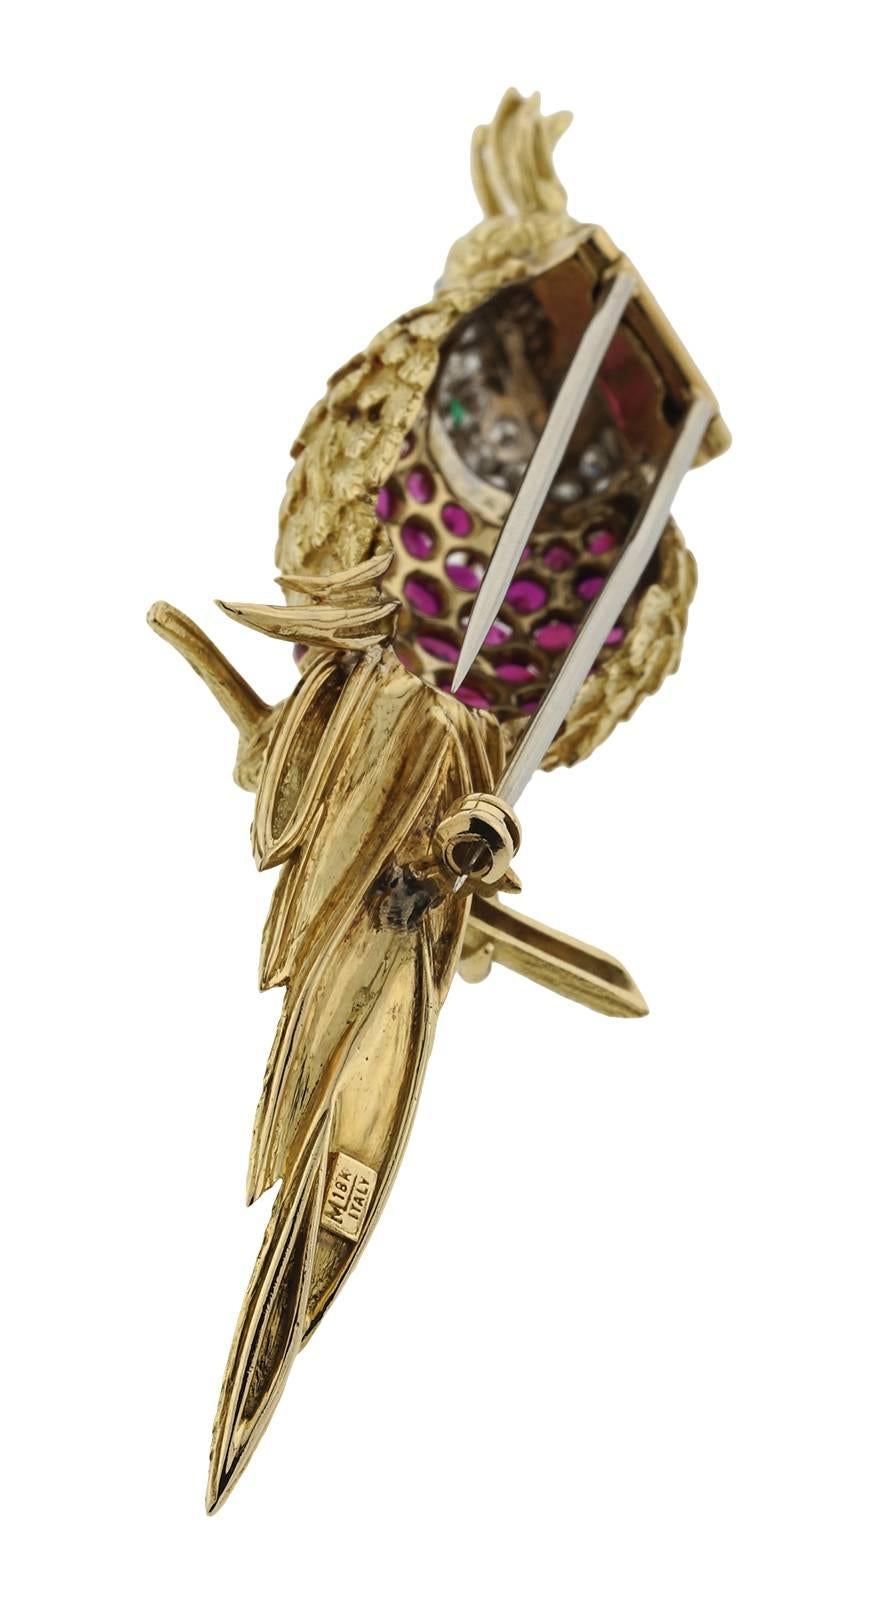 Beautiful Bird Motif pin in 18k yellow gold. Pin weighs 16.00 dwt and contains 38 round rubies weighing approx 6.00ct, 39 round diamonds weighing 1.50ct with G/H Color VS/SI clarity, and one round emerald weighing .15ct. stamped with a makers 